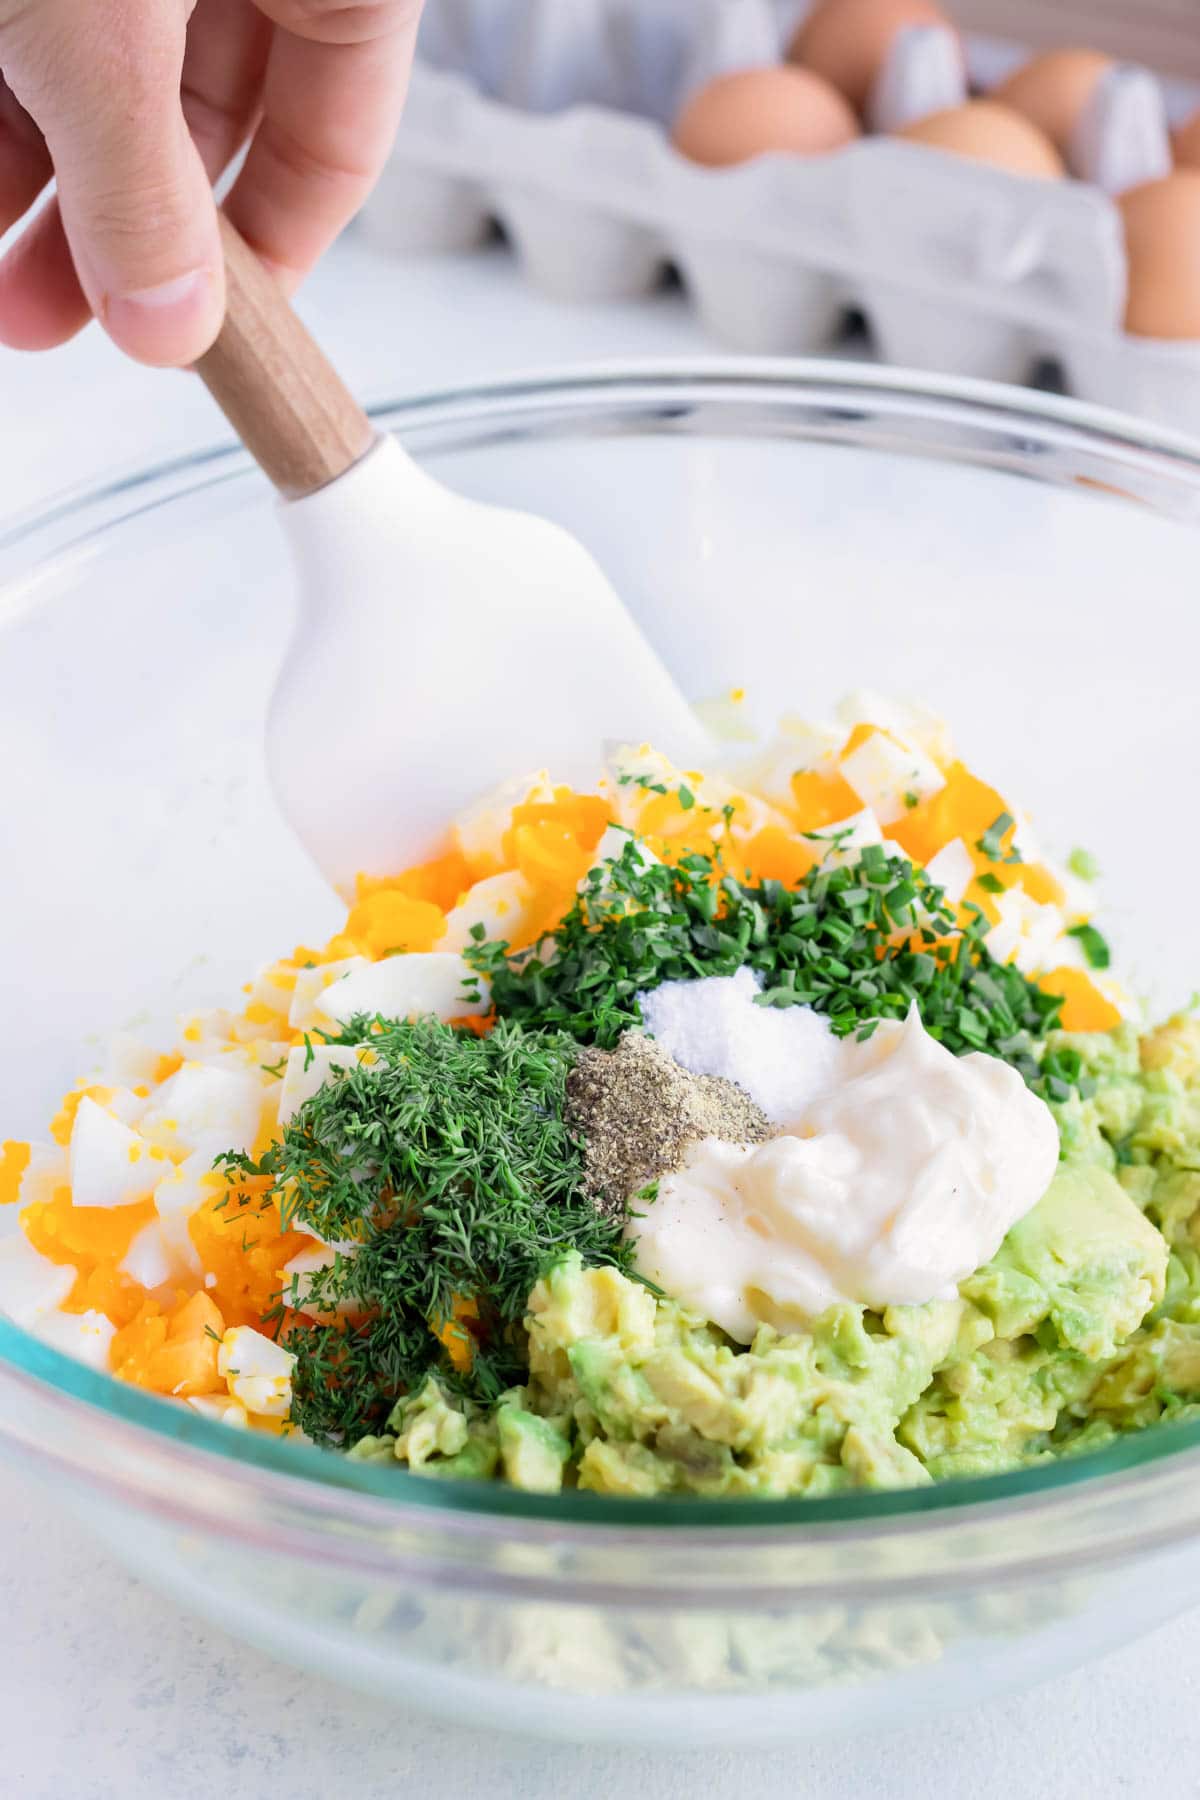 Fresh herbs, eggs, avocado, and mayonnaise are mixed together in a bowl.